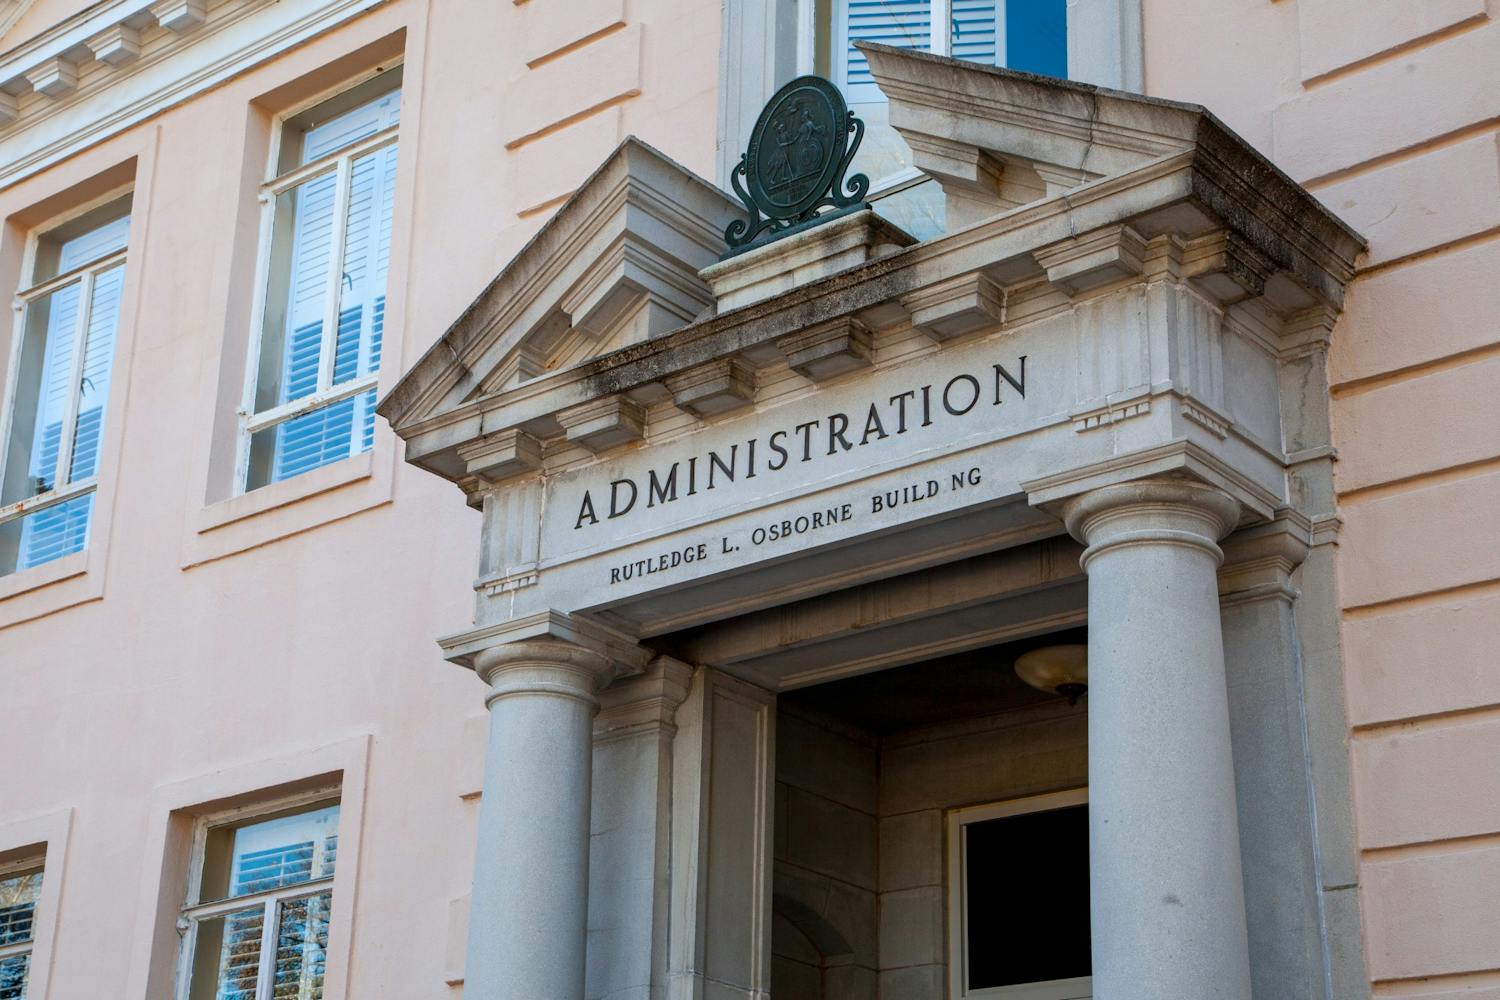 The Osborne Administration Building in Columbia, SC, on March 1, 2022. The building houses administrative offices for the University of South Carolina.